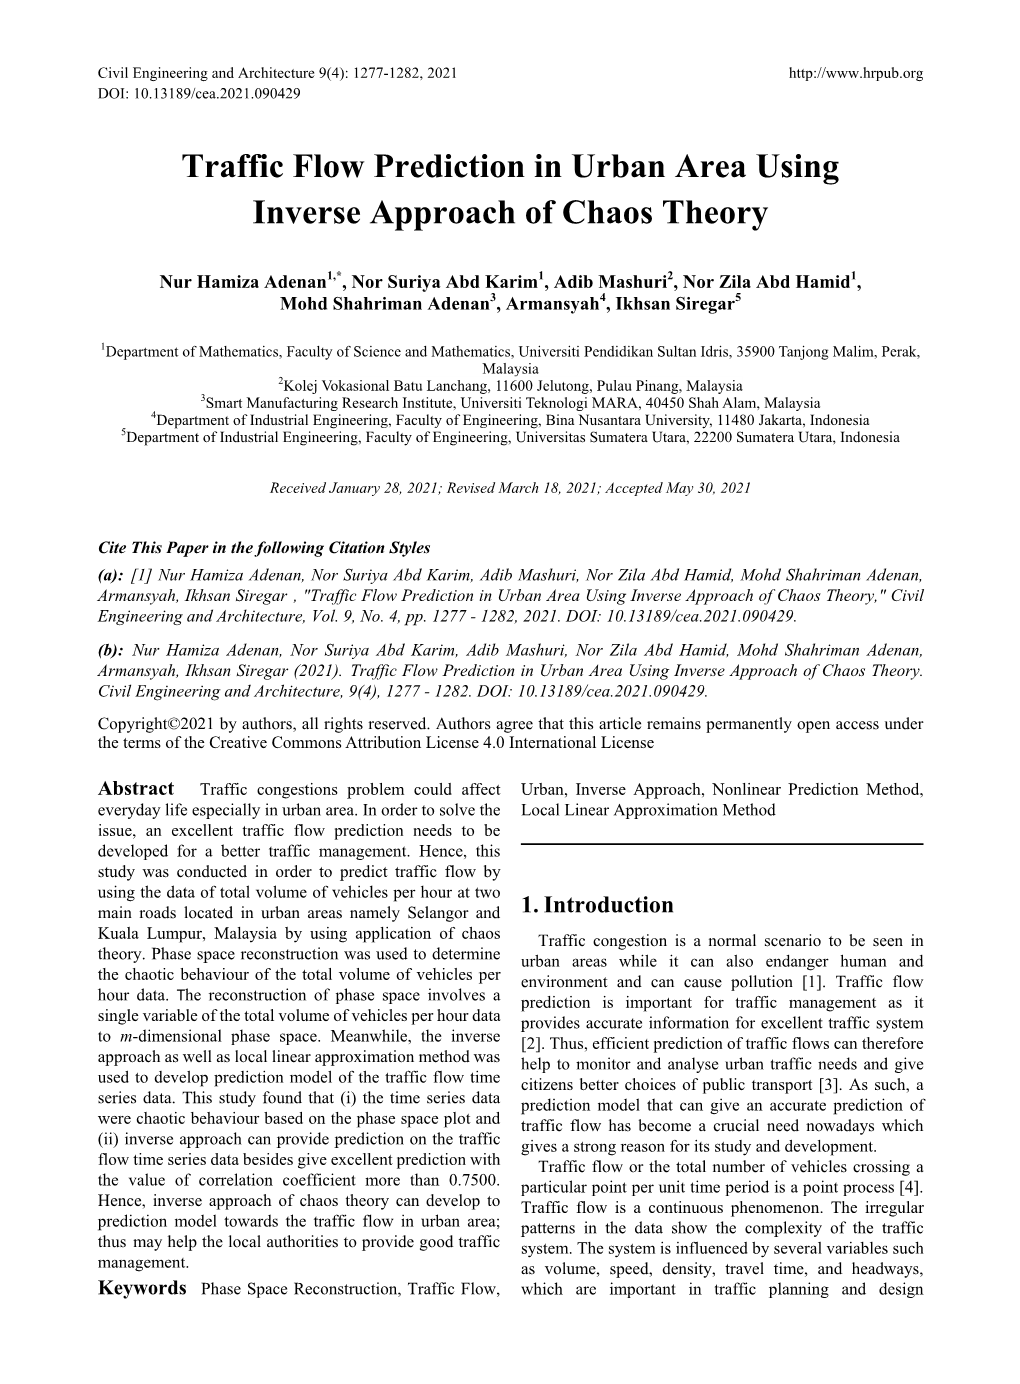 Traffic Flow Prediction in Urban Area Using Inverse Approach of Chaos Theory